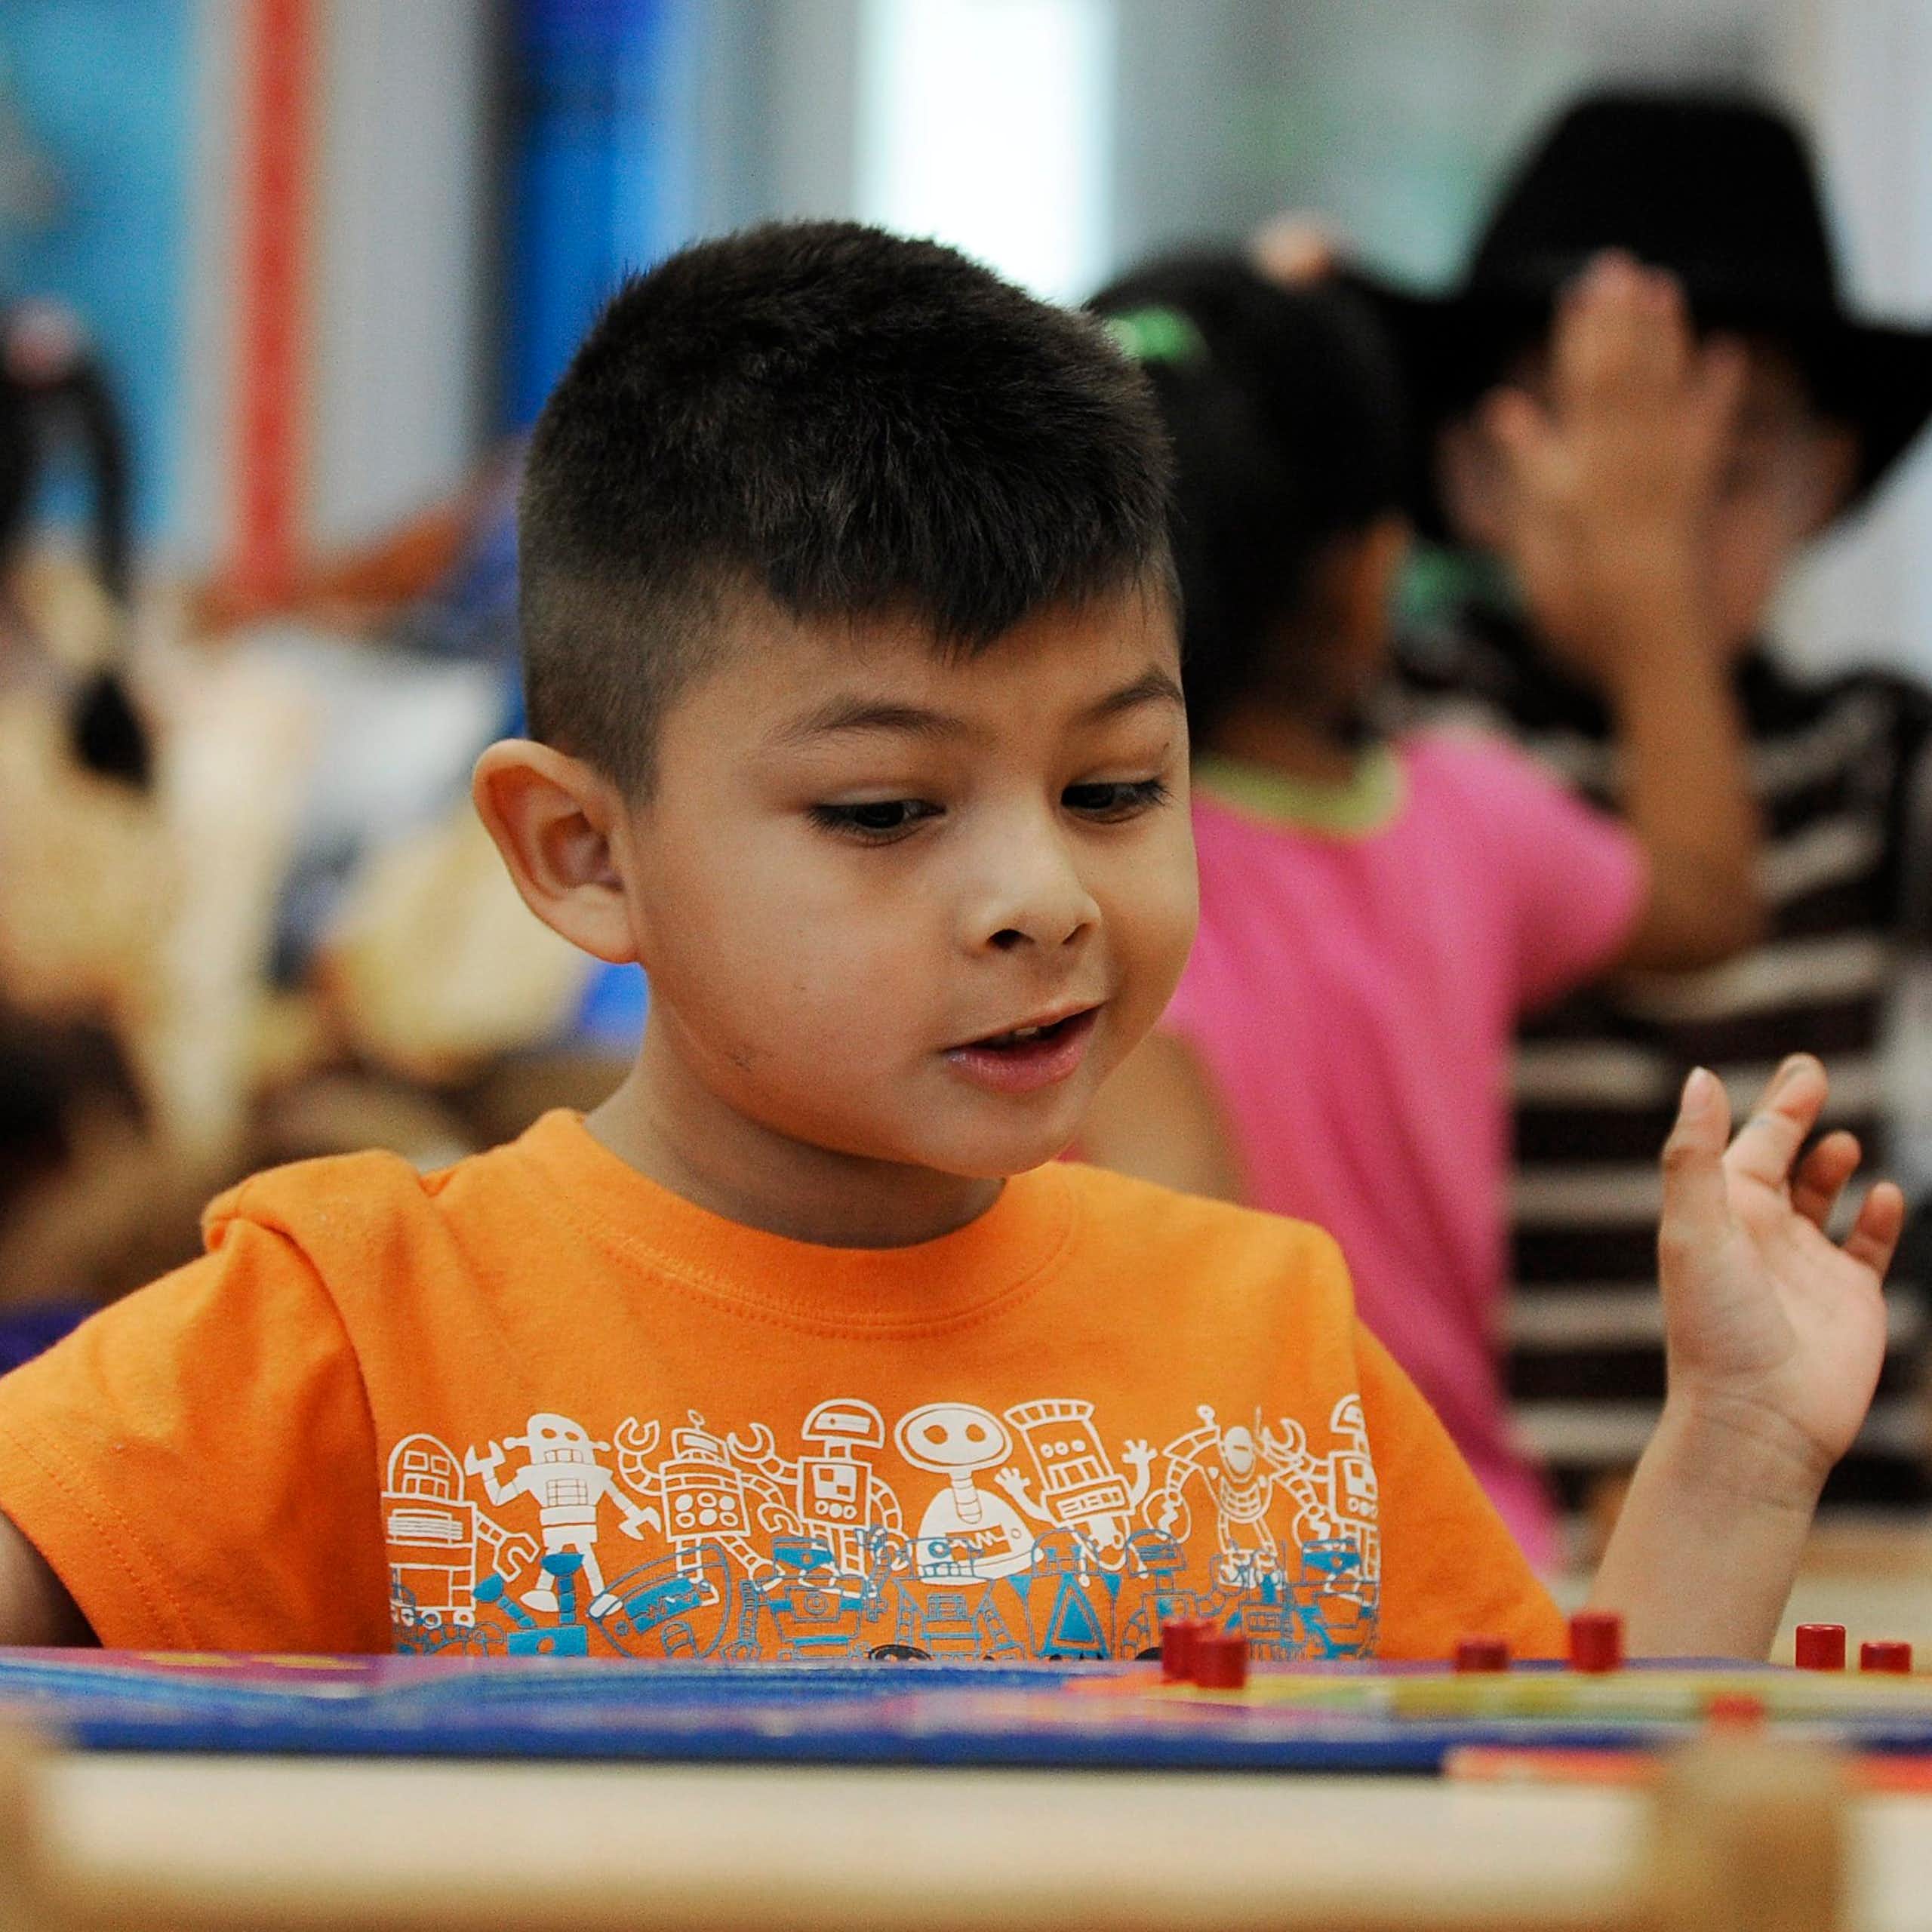 A child looking absorbed in figuring out a puzzle with a snamm smile on his face.